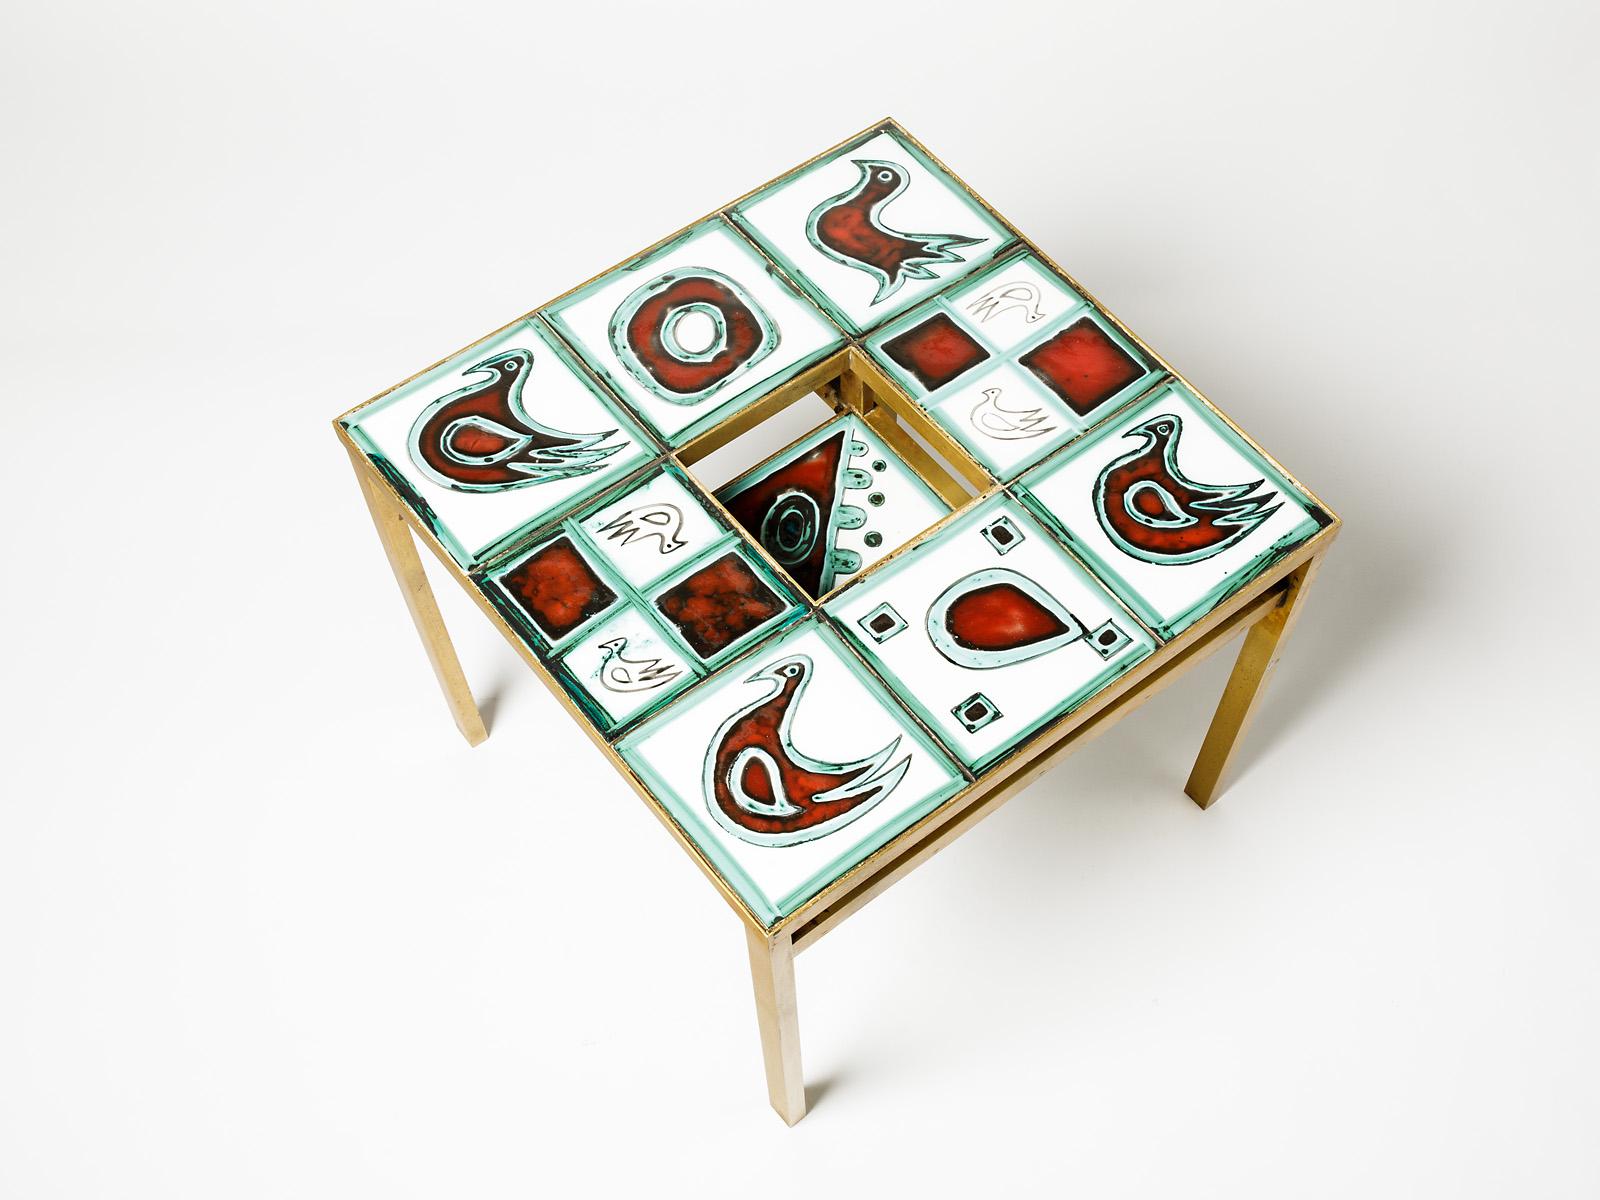 French Ceramic Low Coffee Table with Golden Brass Feet circa 1970 attributed Poet Laval